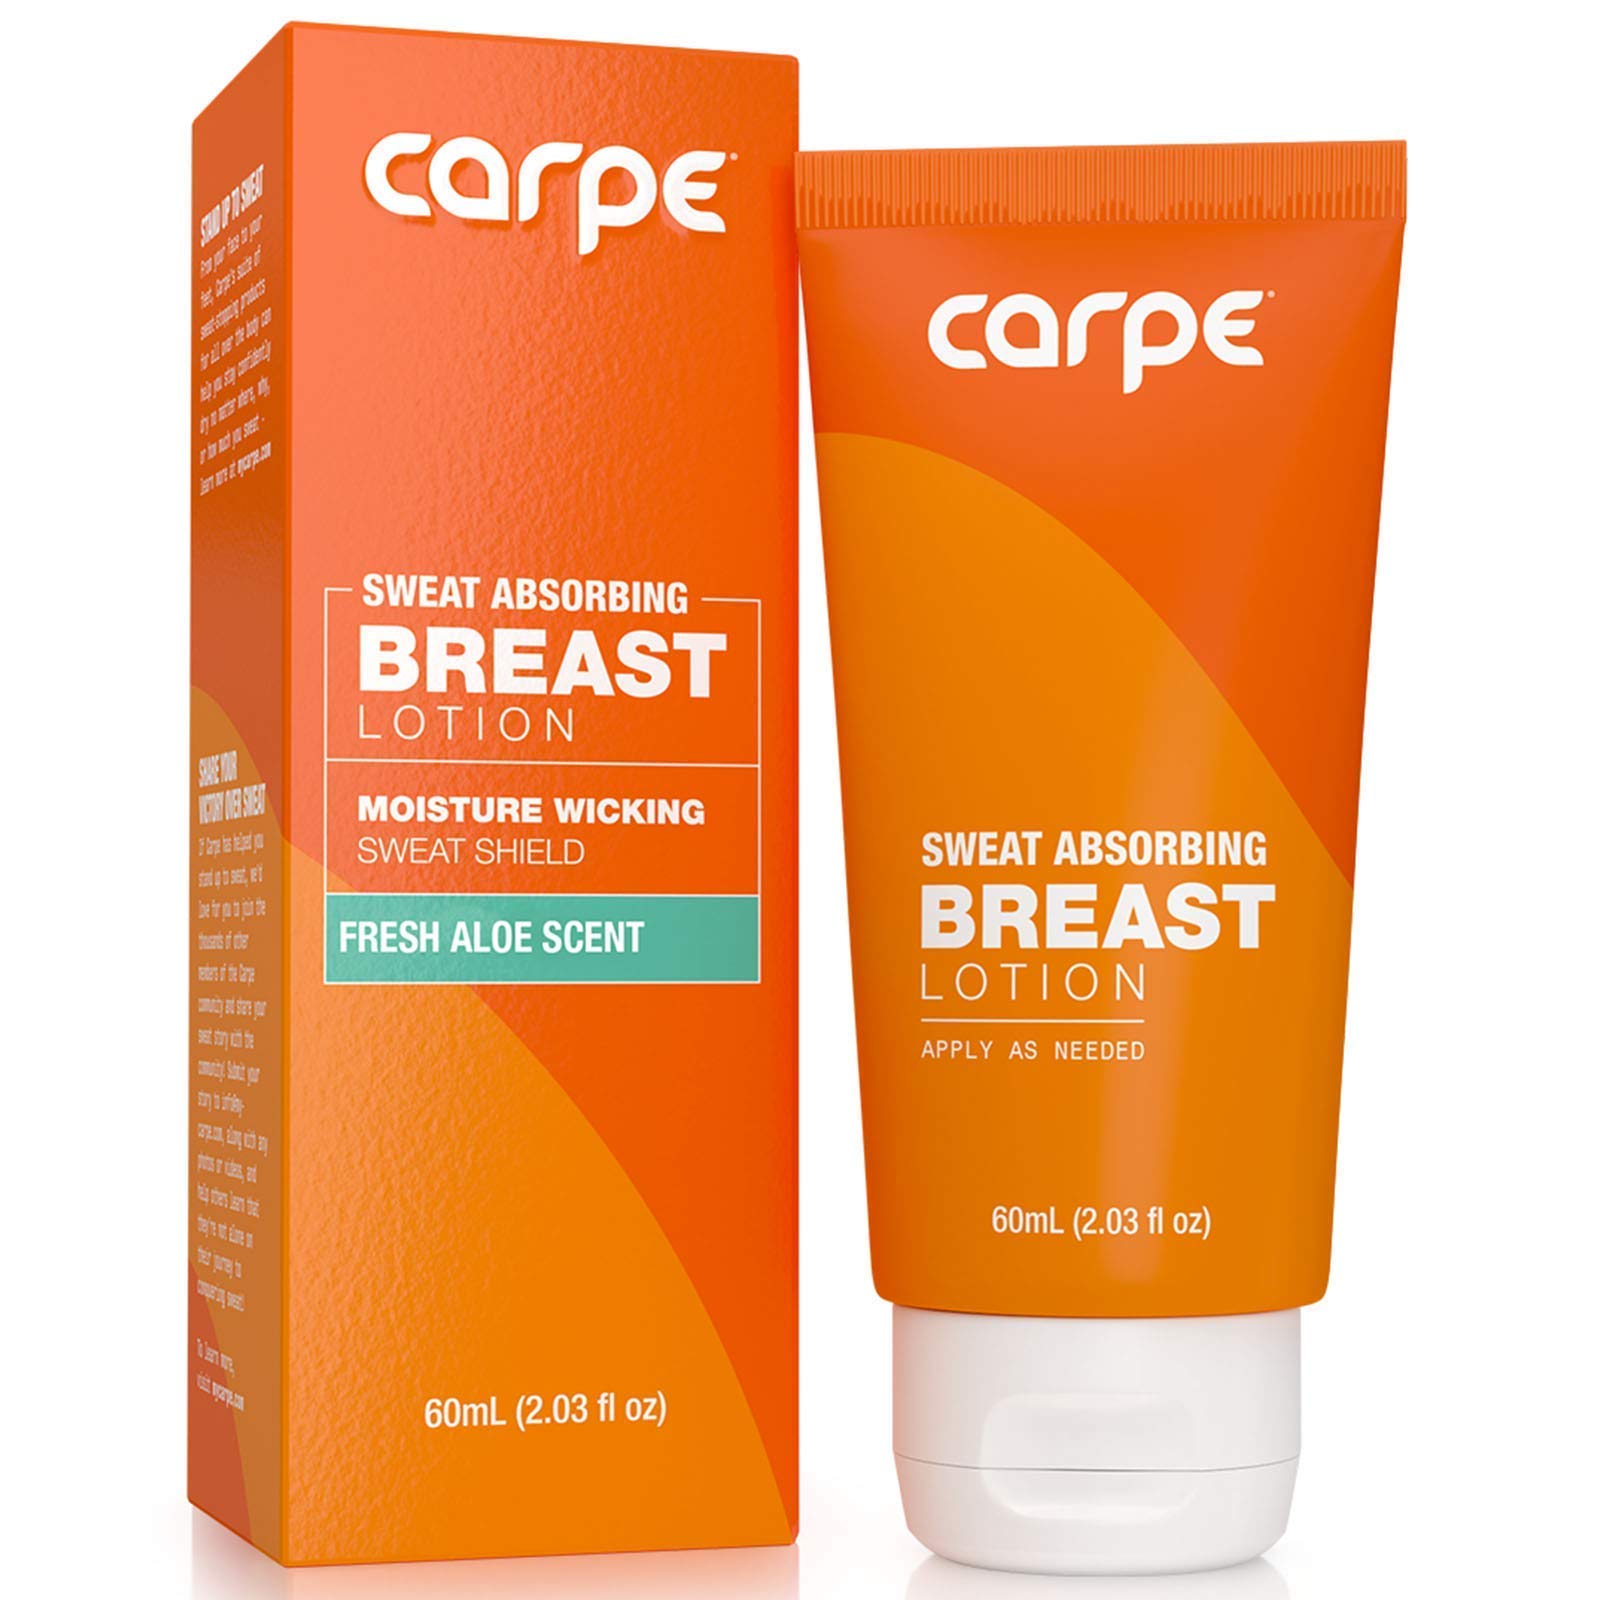 Carpe Antiperspirant Hand & Breast Package (1Hand Antiperspirant & 1Breast Sweat Absorbing), Stop Excessive Sweat, Hyperhidrosis Protection, Dermatologist Recommended.